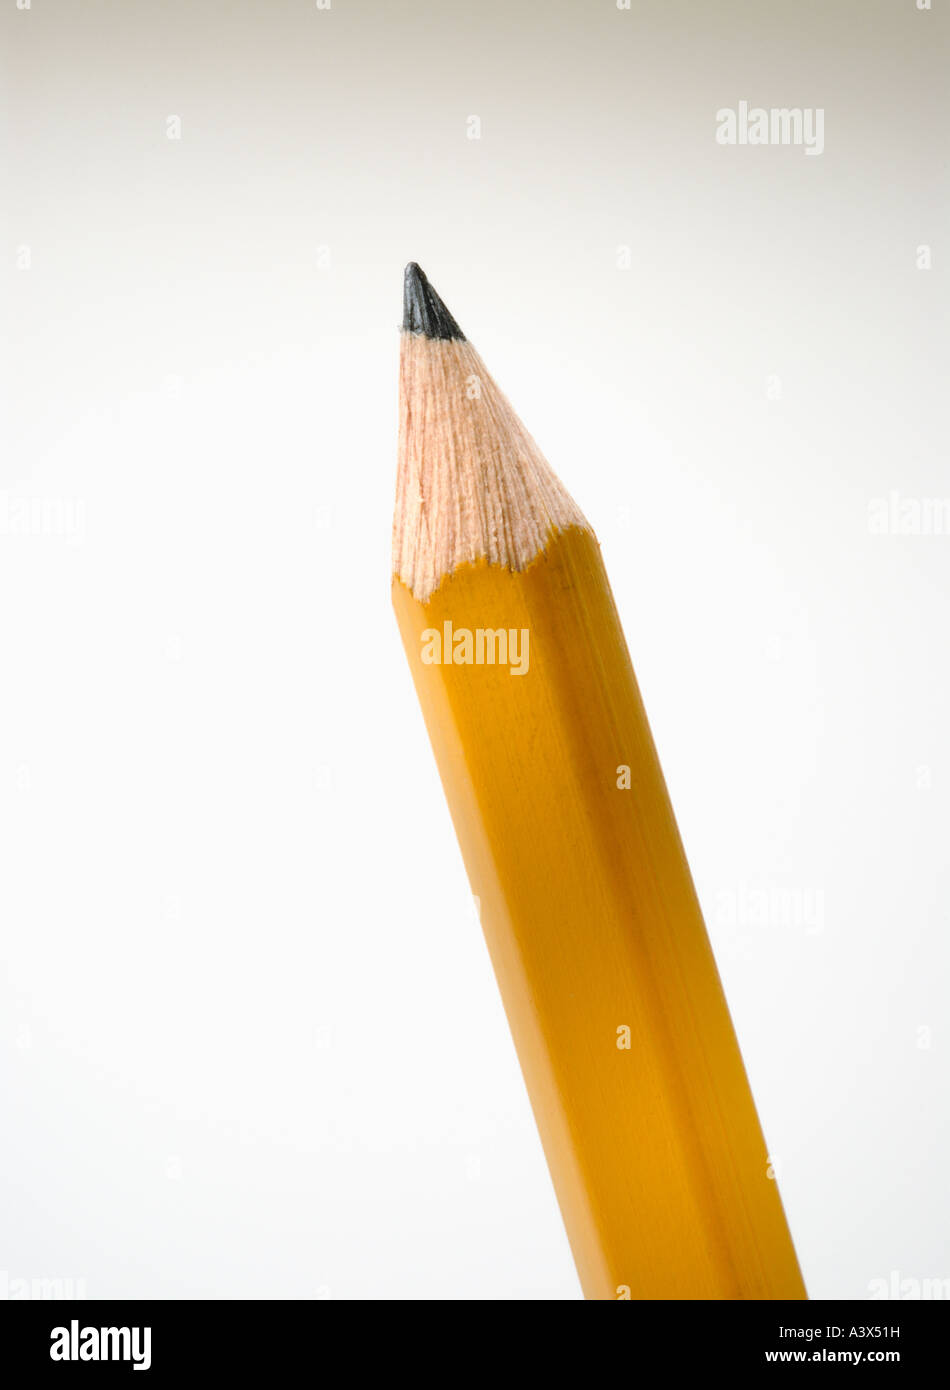 Sharpened Pencil Point Stock Photo